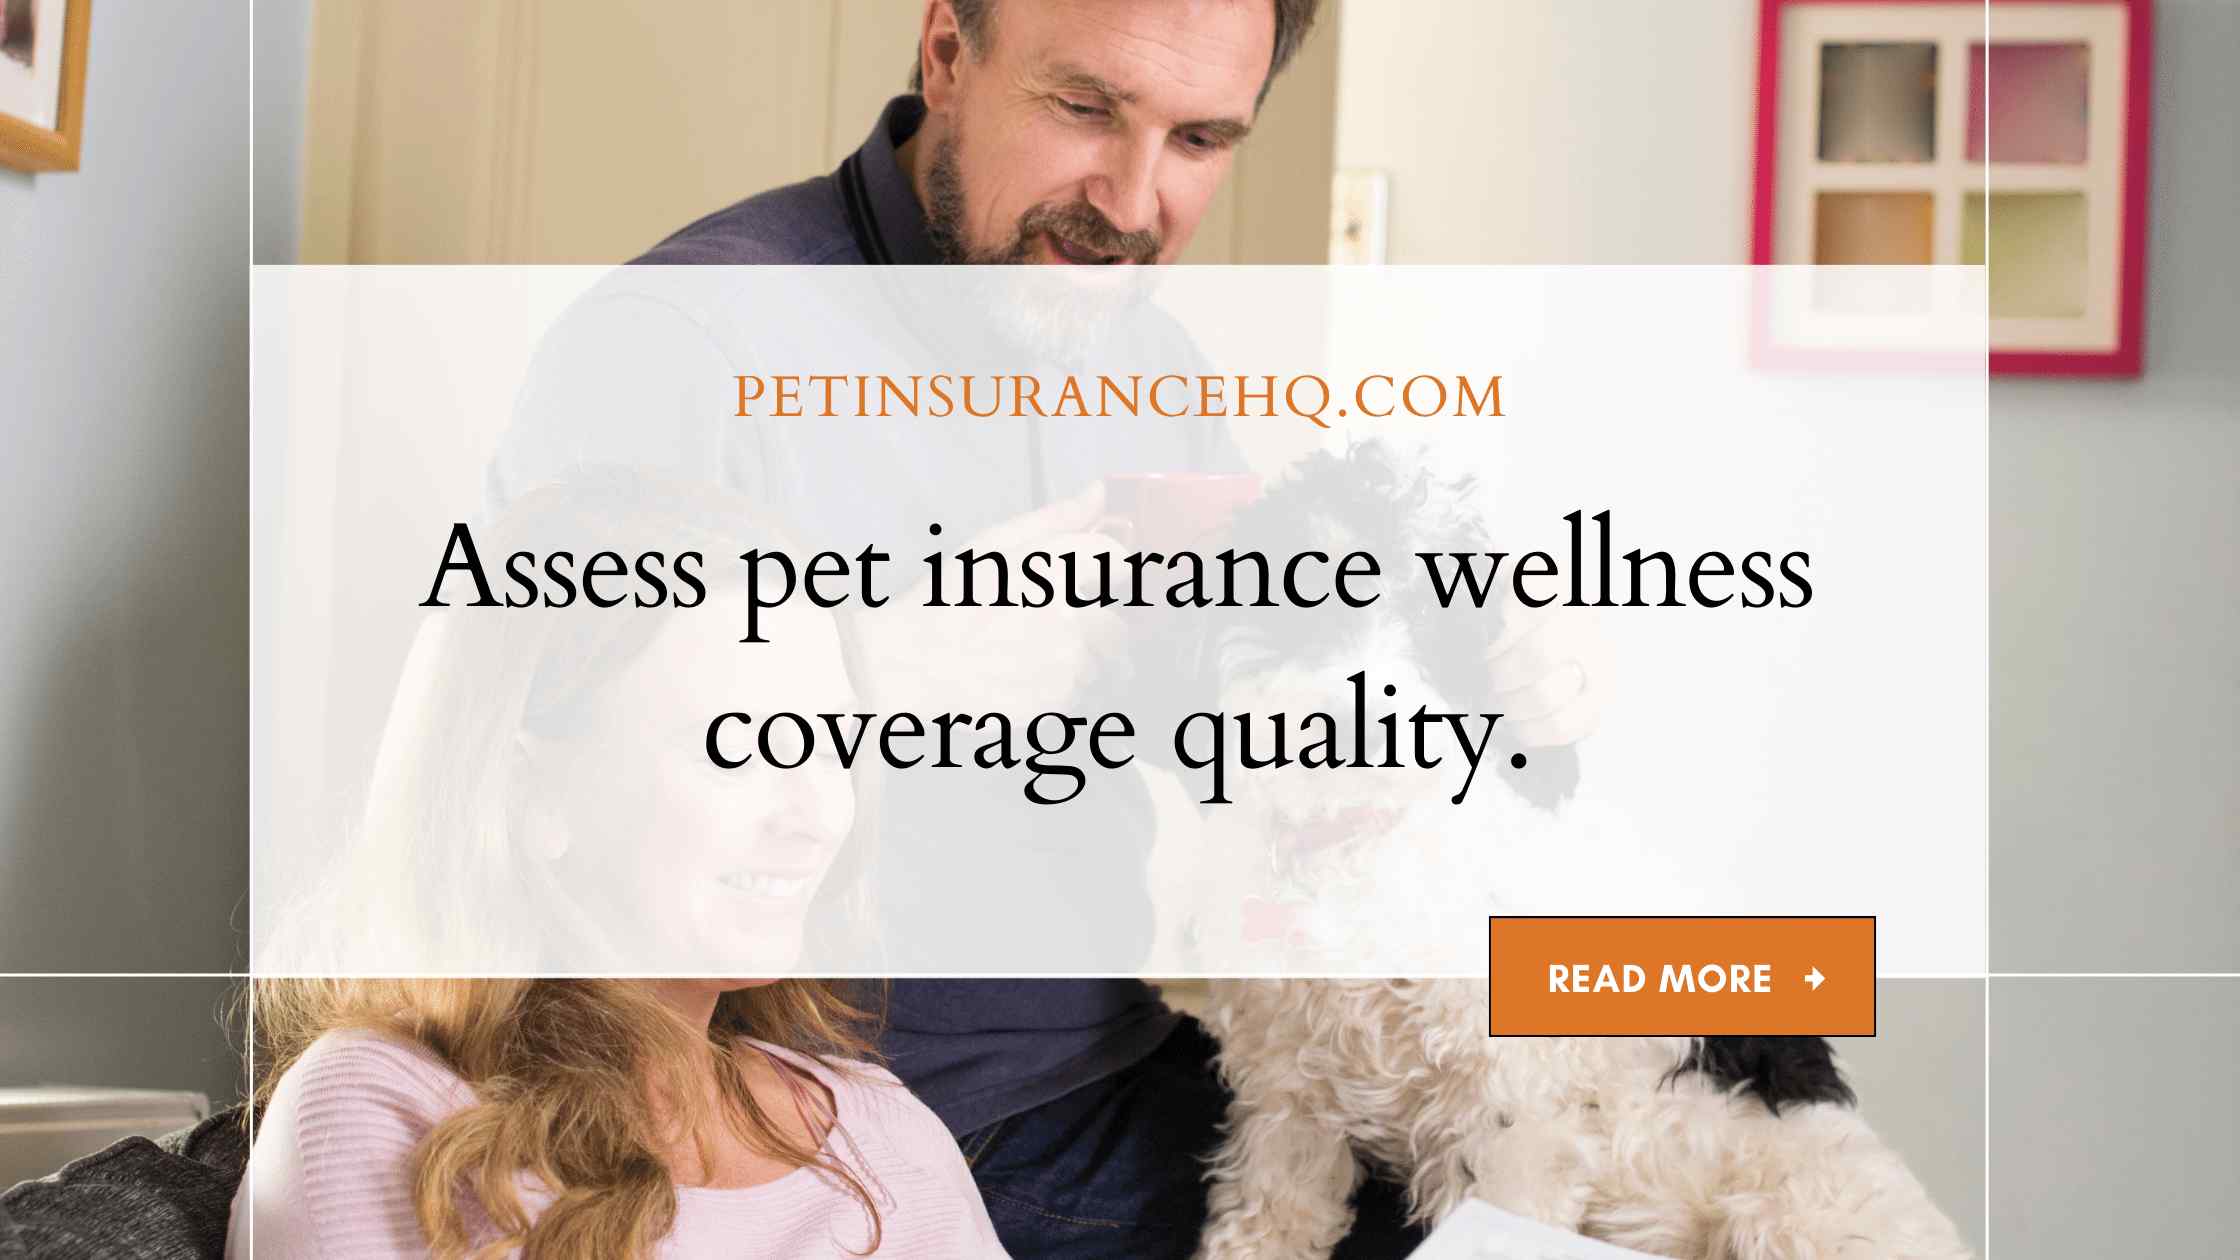 How to evaluate the quality of a pet insurance company’s wellness coverage